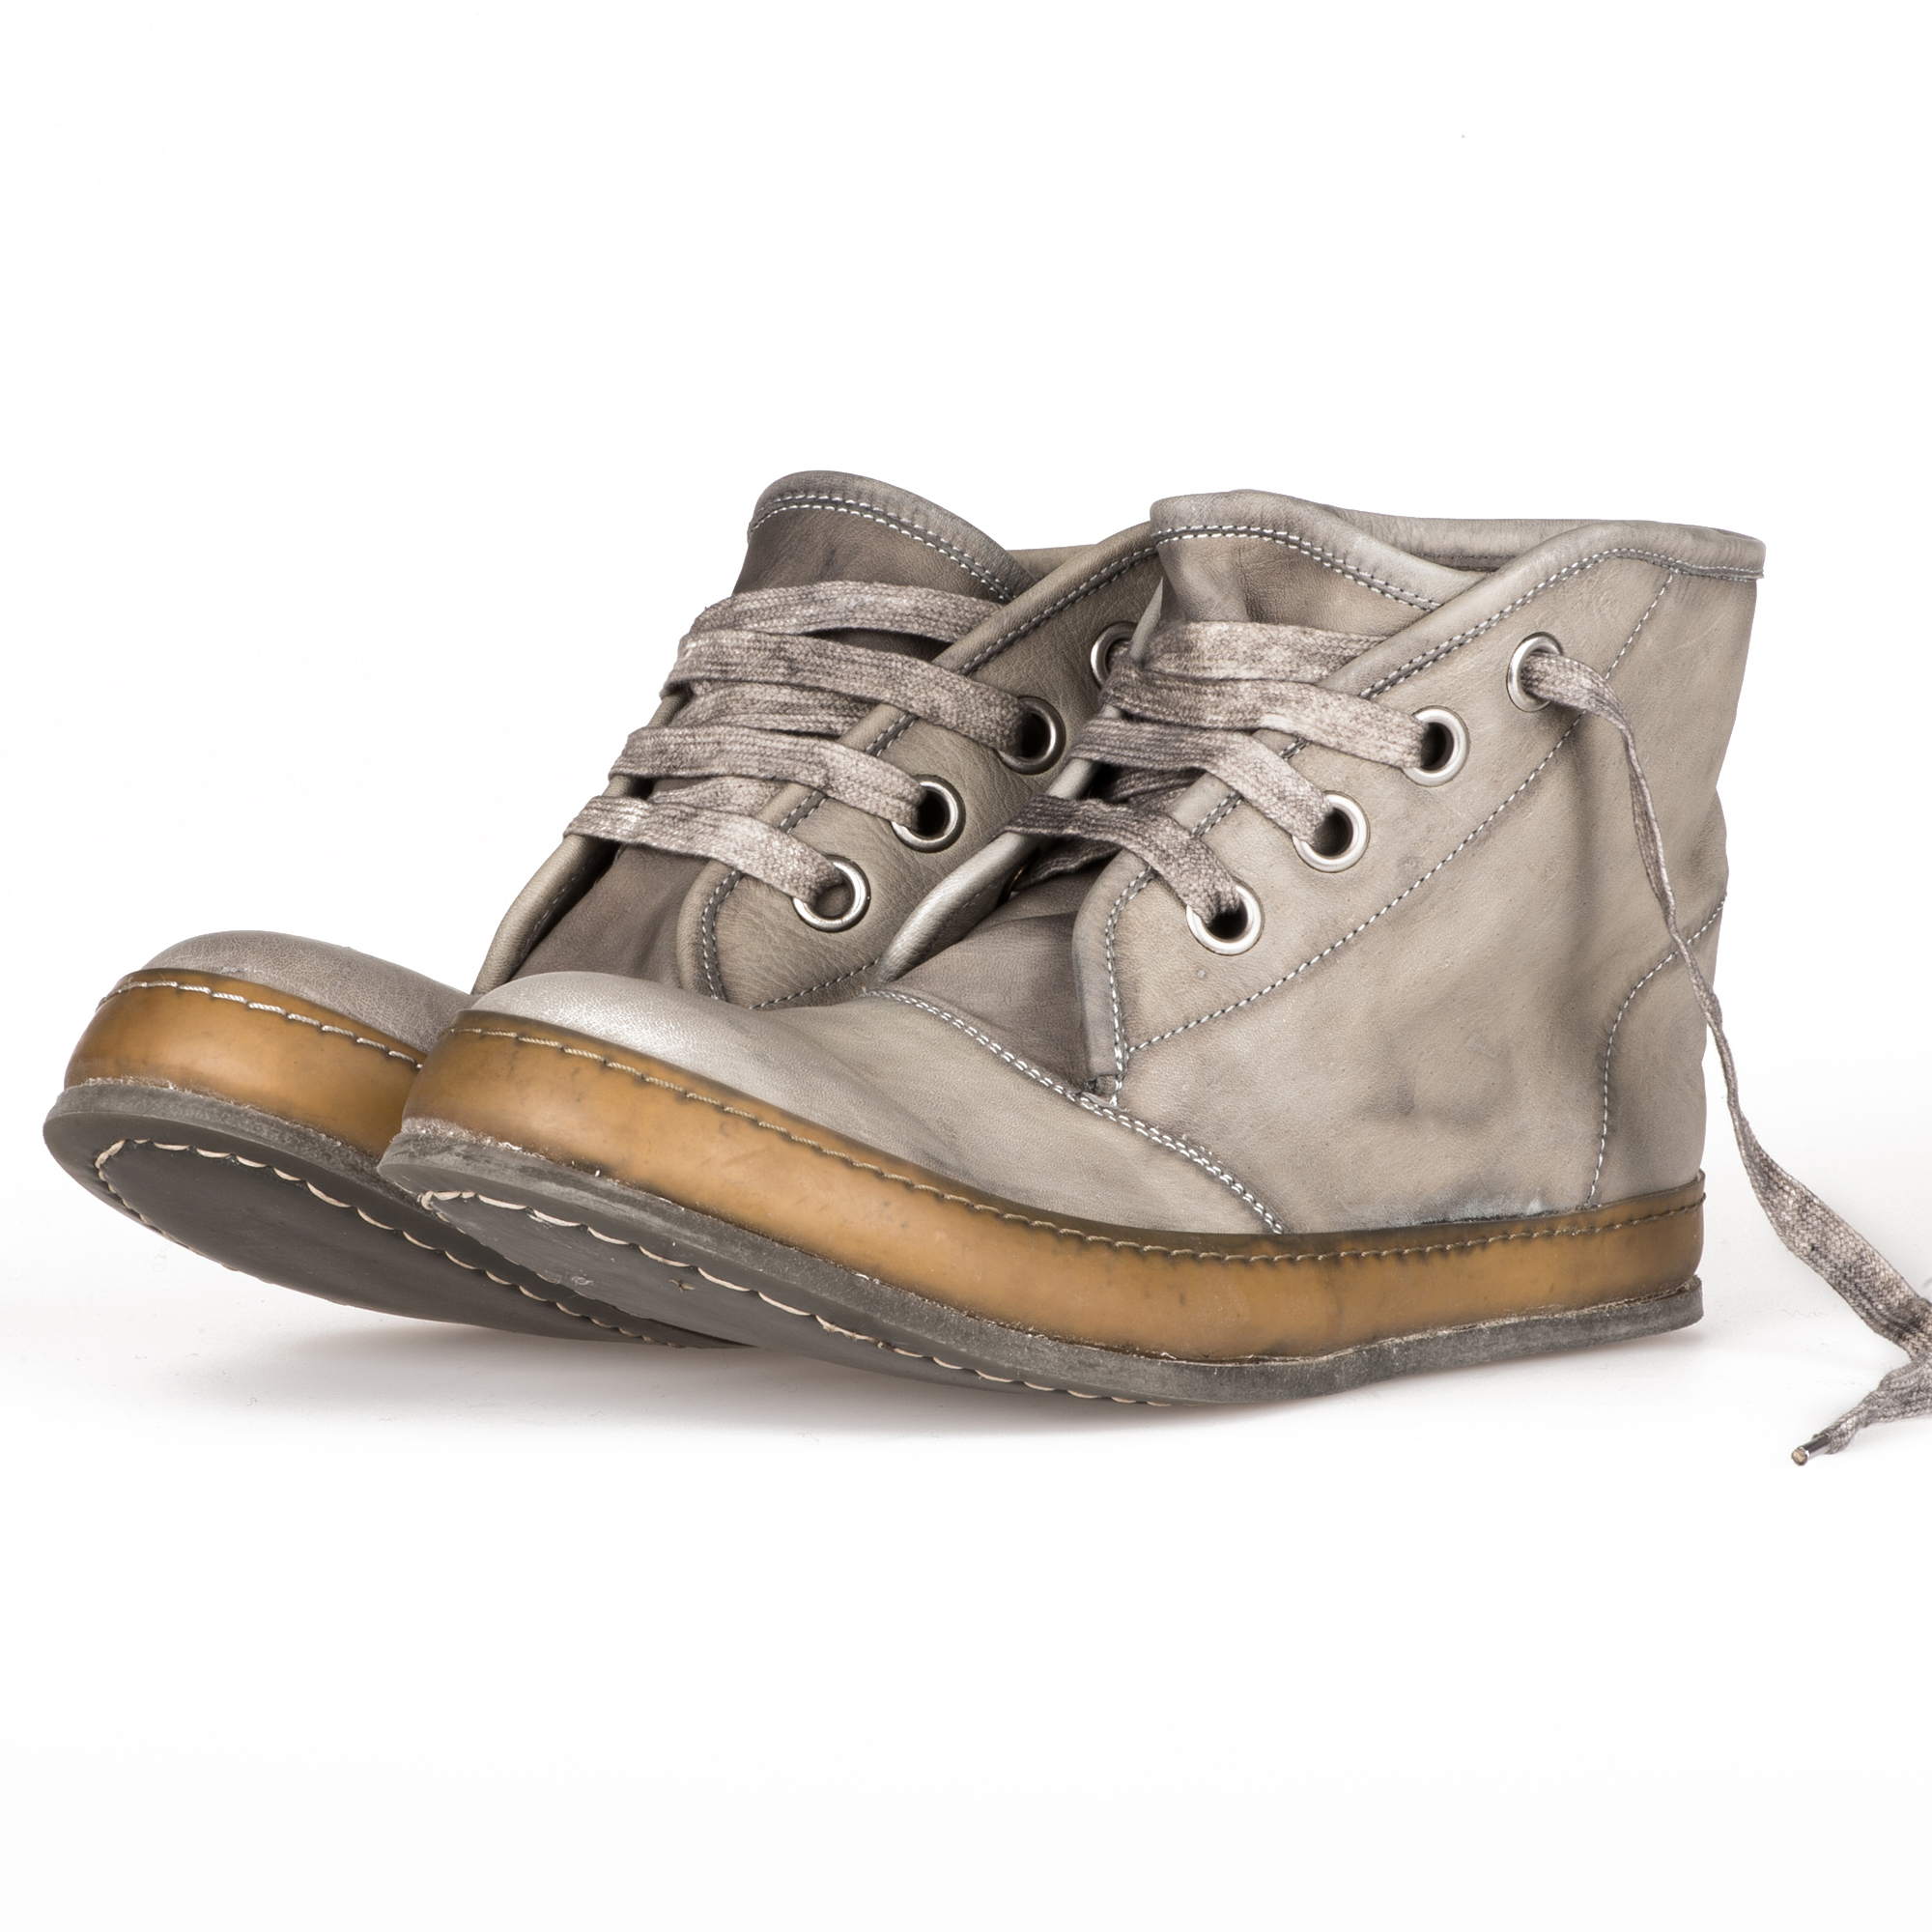 LIGHT GREY HIGH TOP SNEAKERS|wolfensson